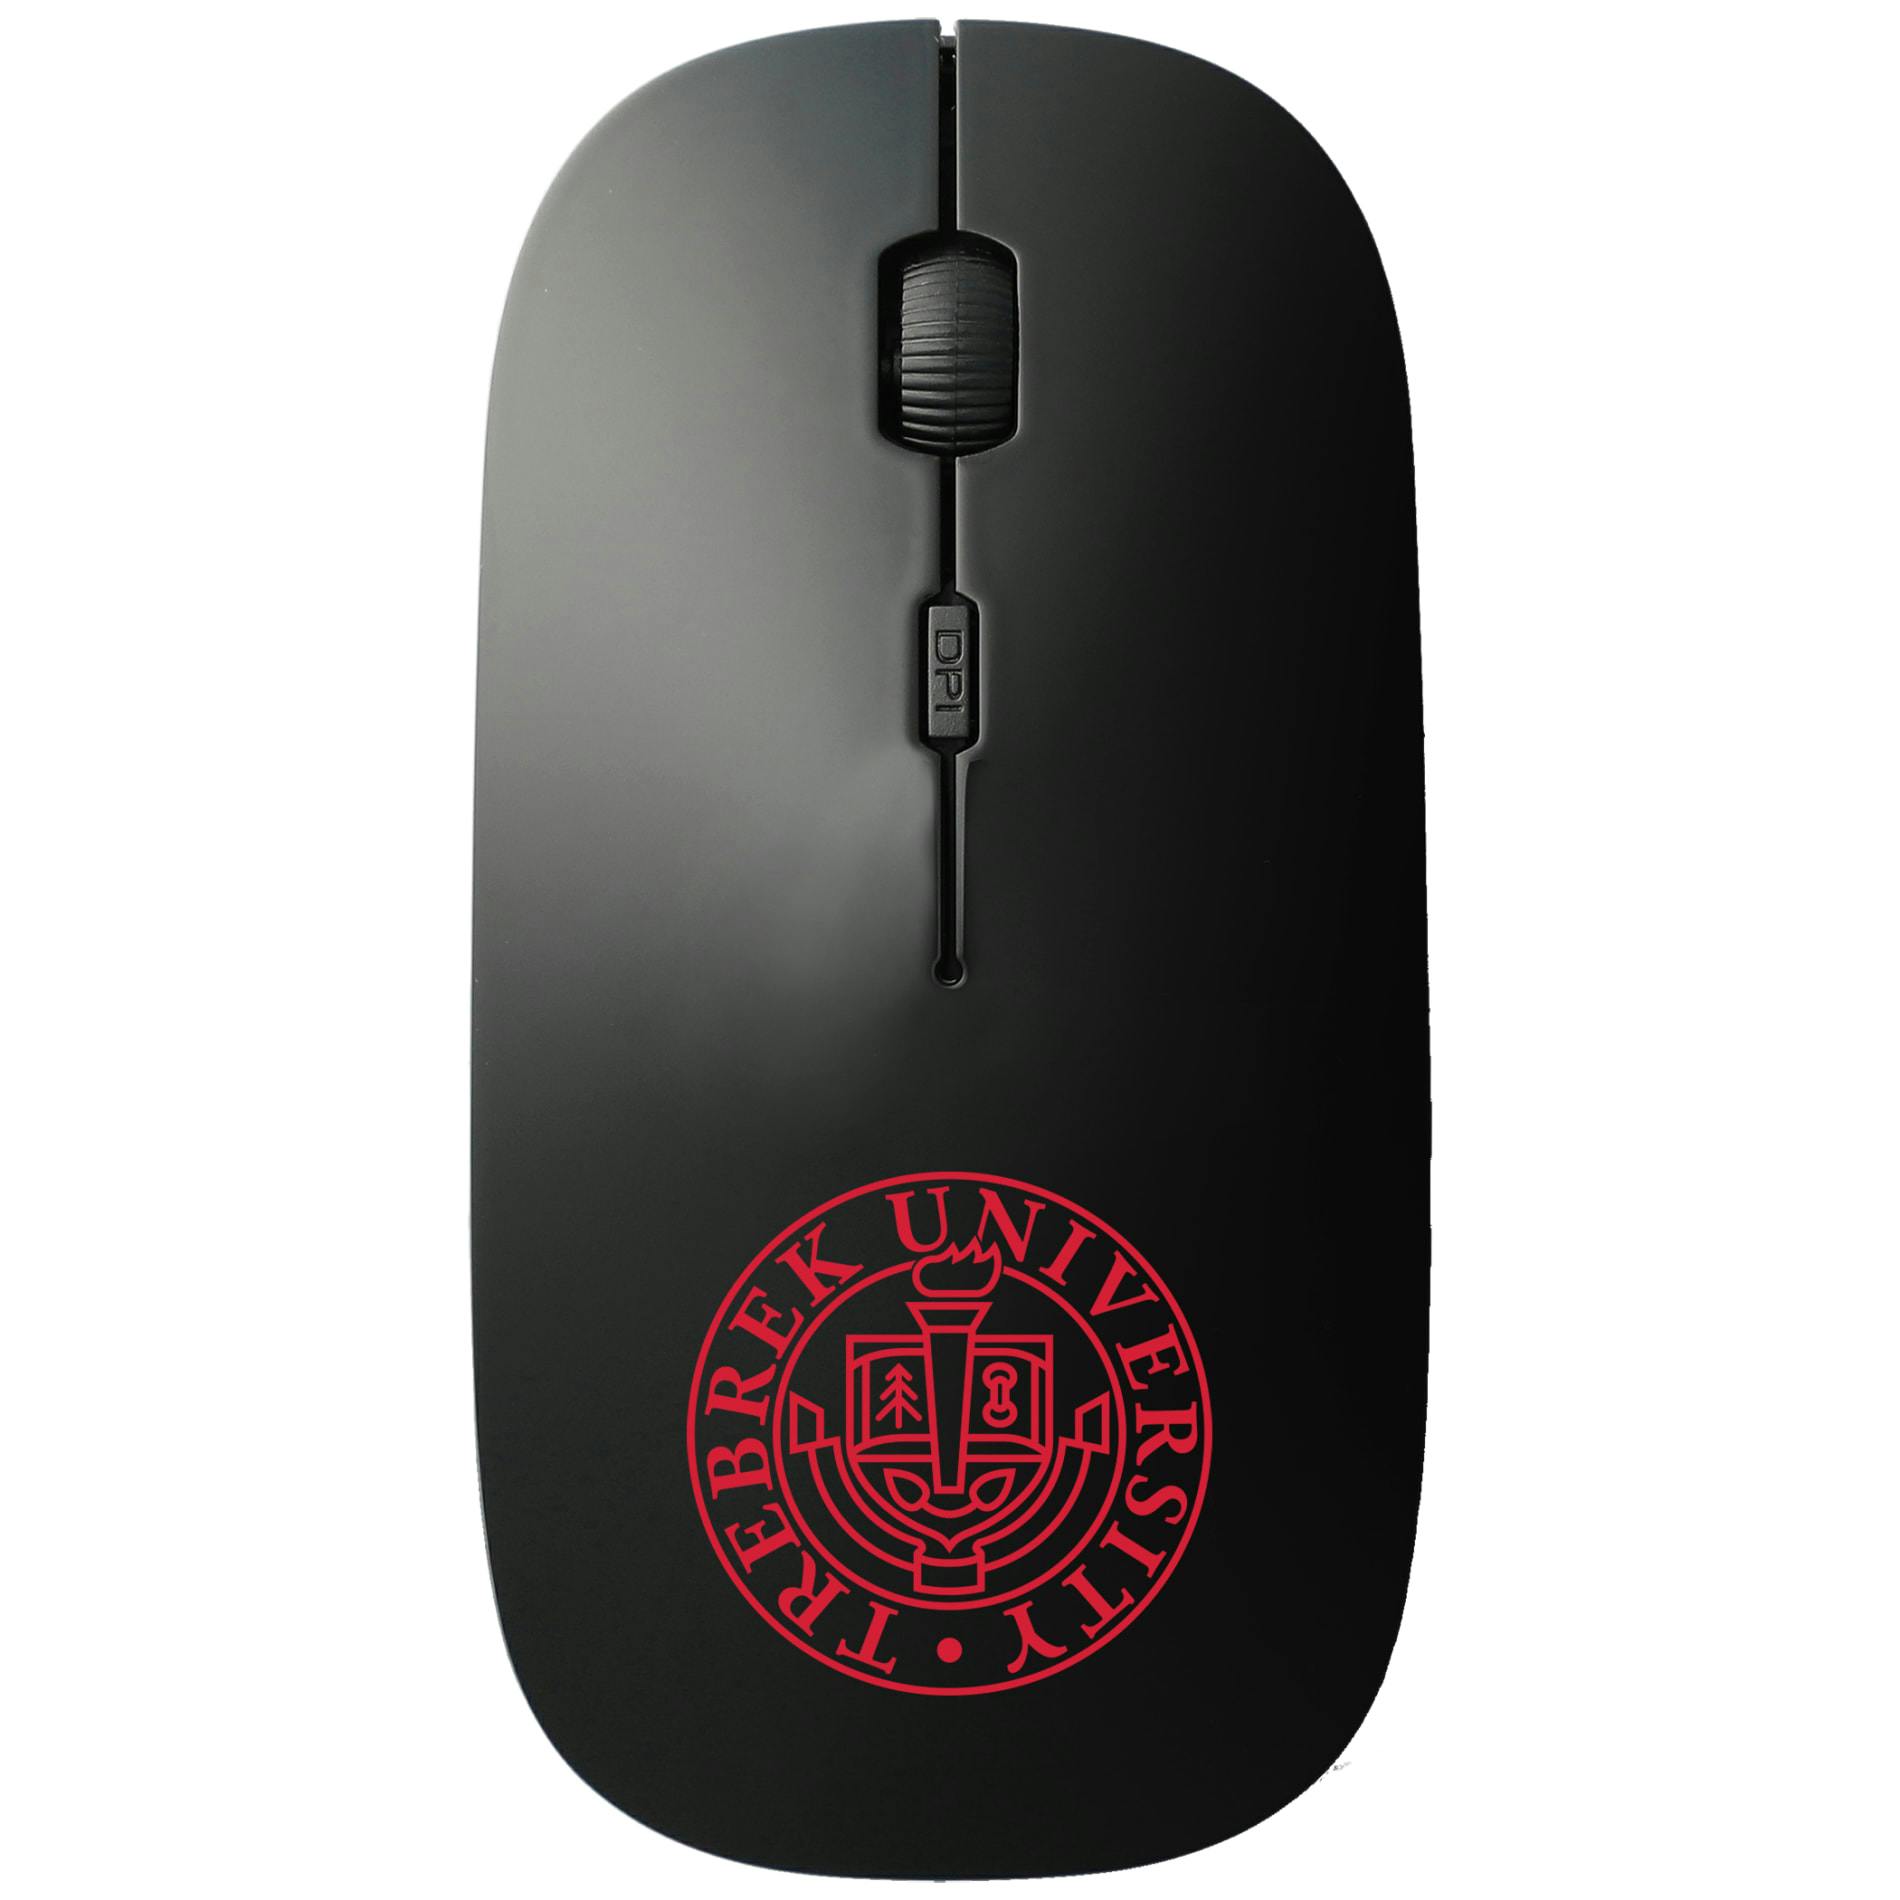 Accel Portable Wireless Mouse and Pad - additional Image 1